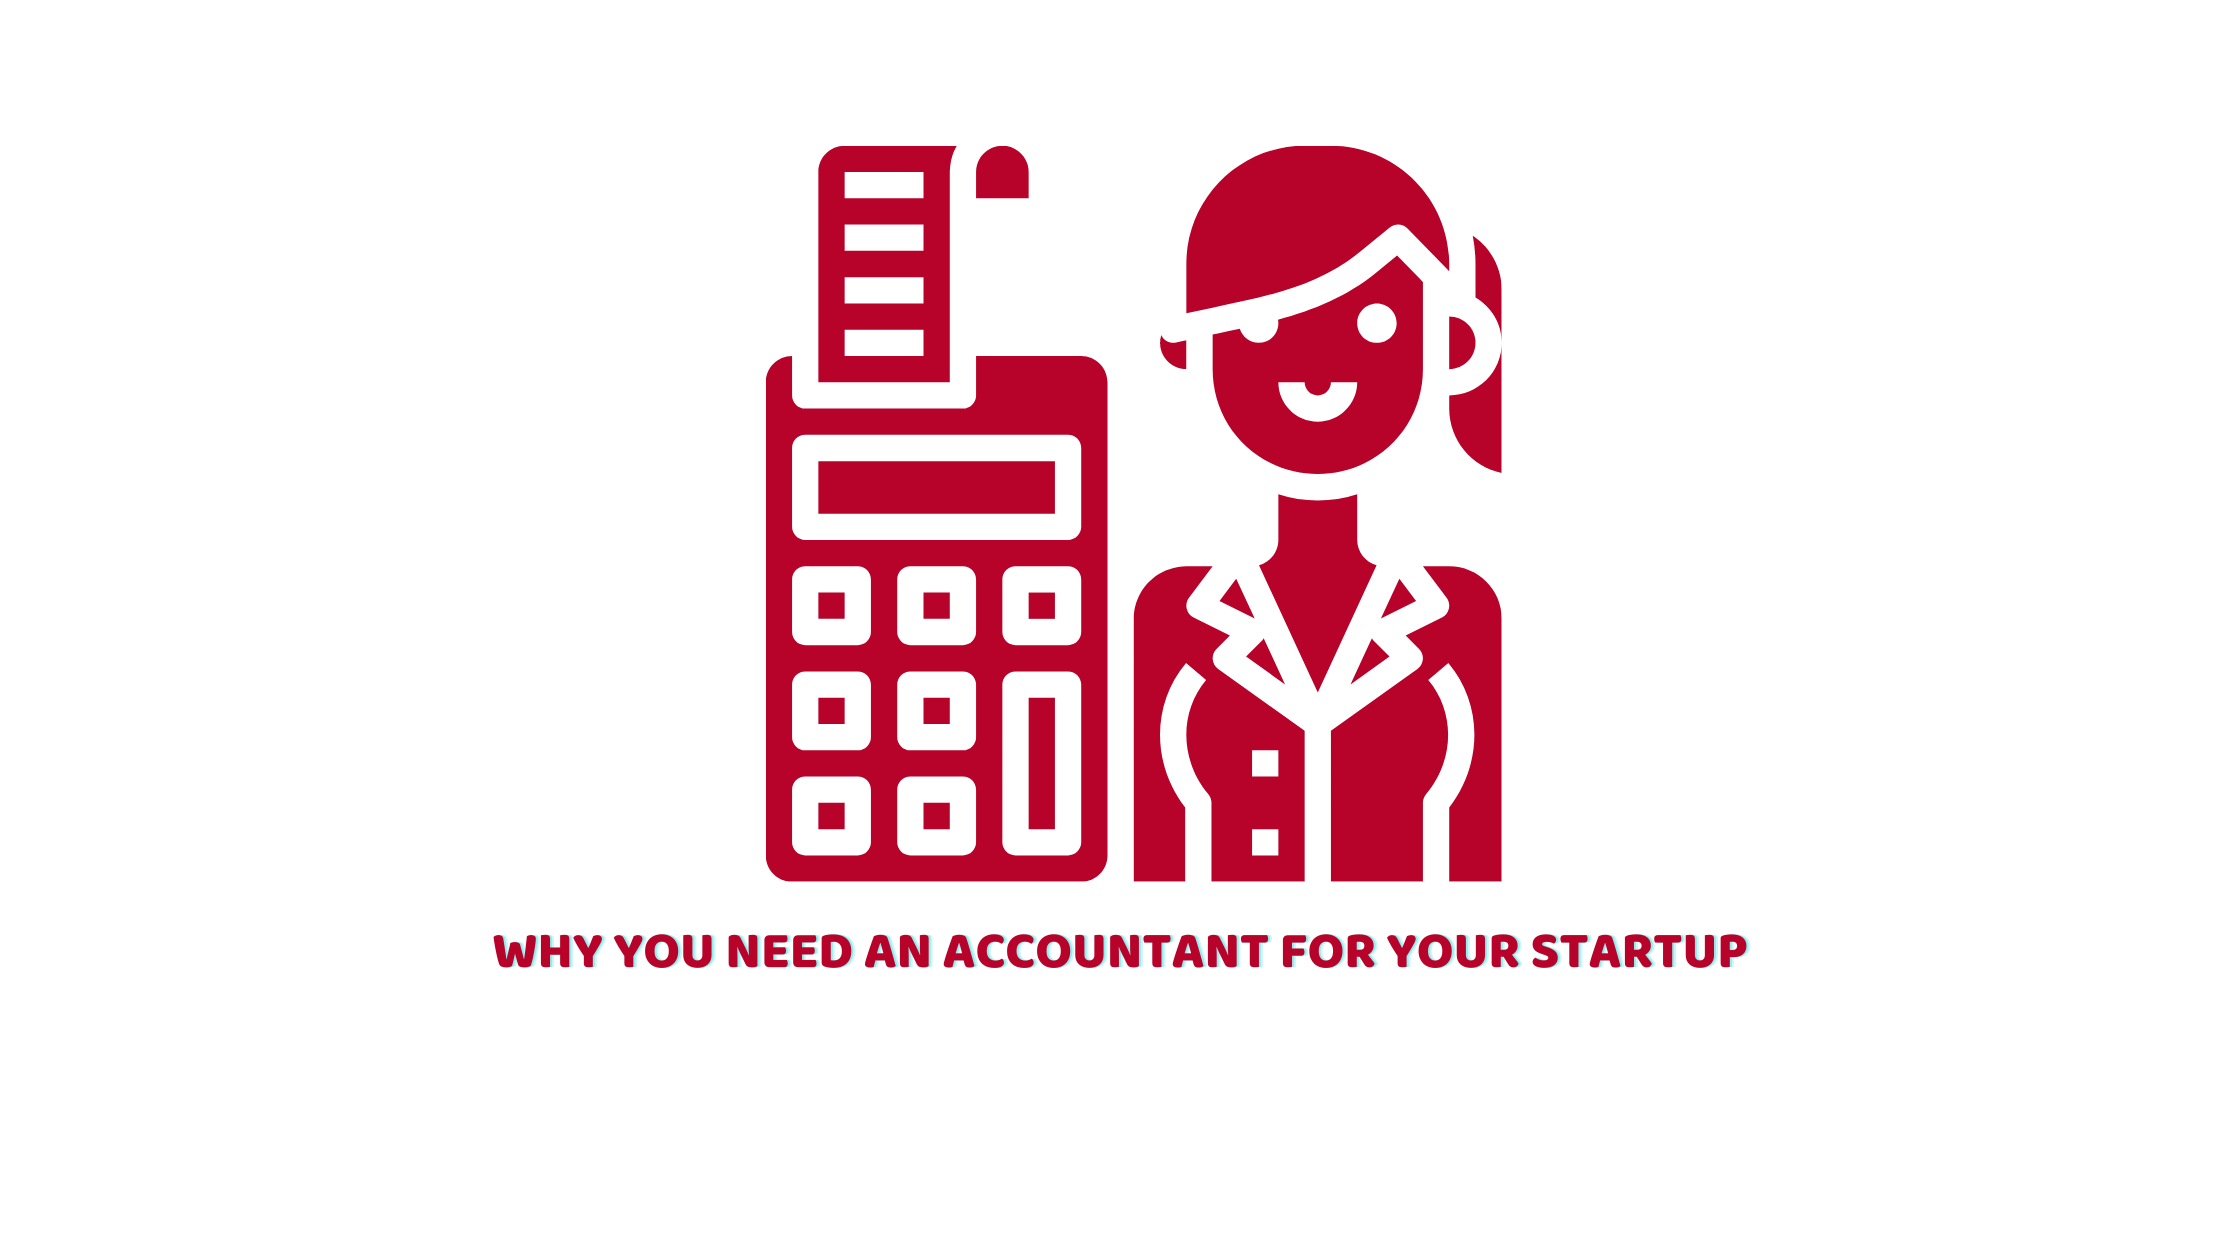 Why You Need an Accountant for Your Startup